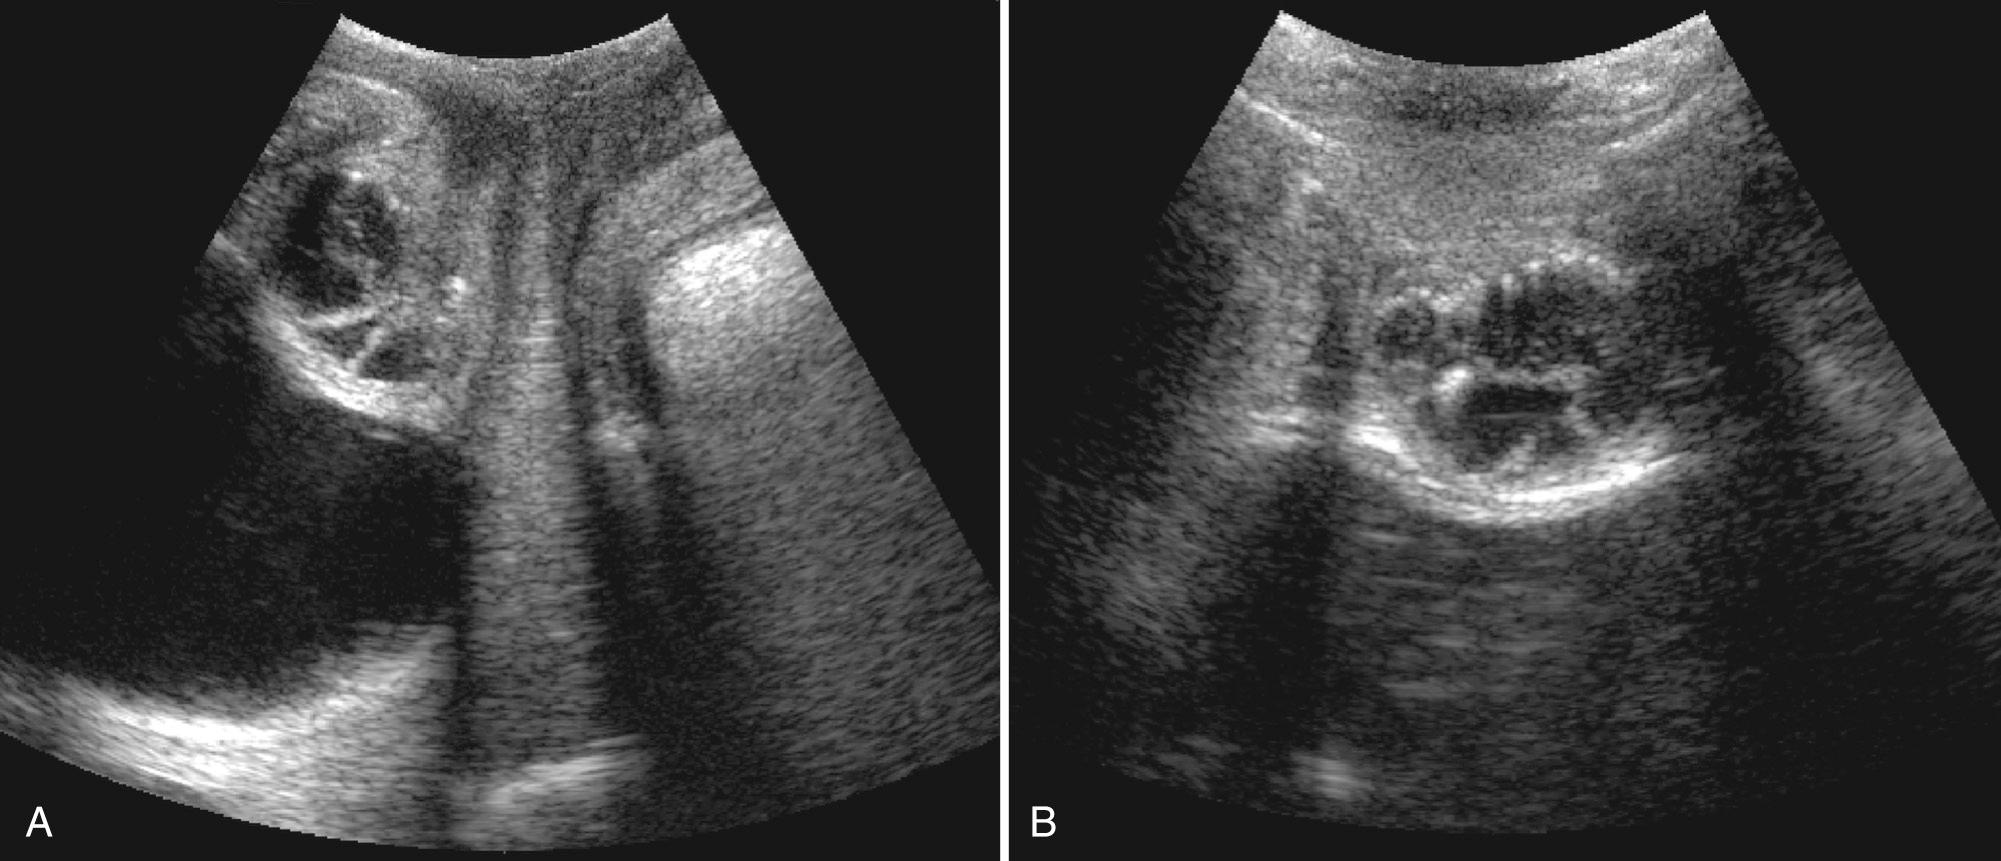 FIG. 9.18, Urethral Diverticulum in Young Woman With Palpable Vaginal Mass.